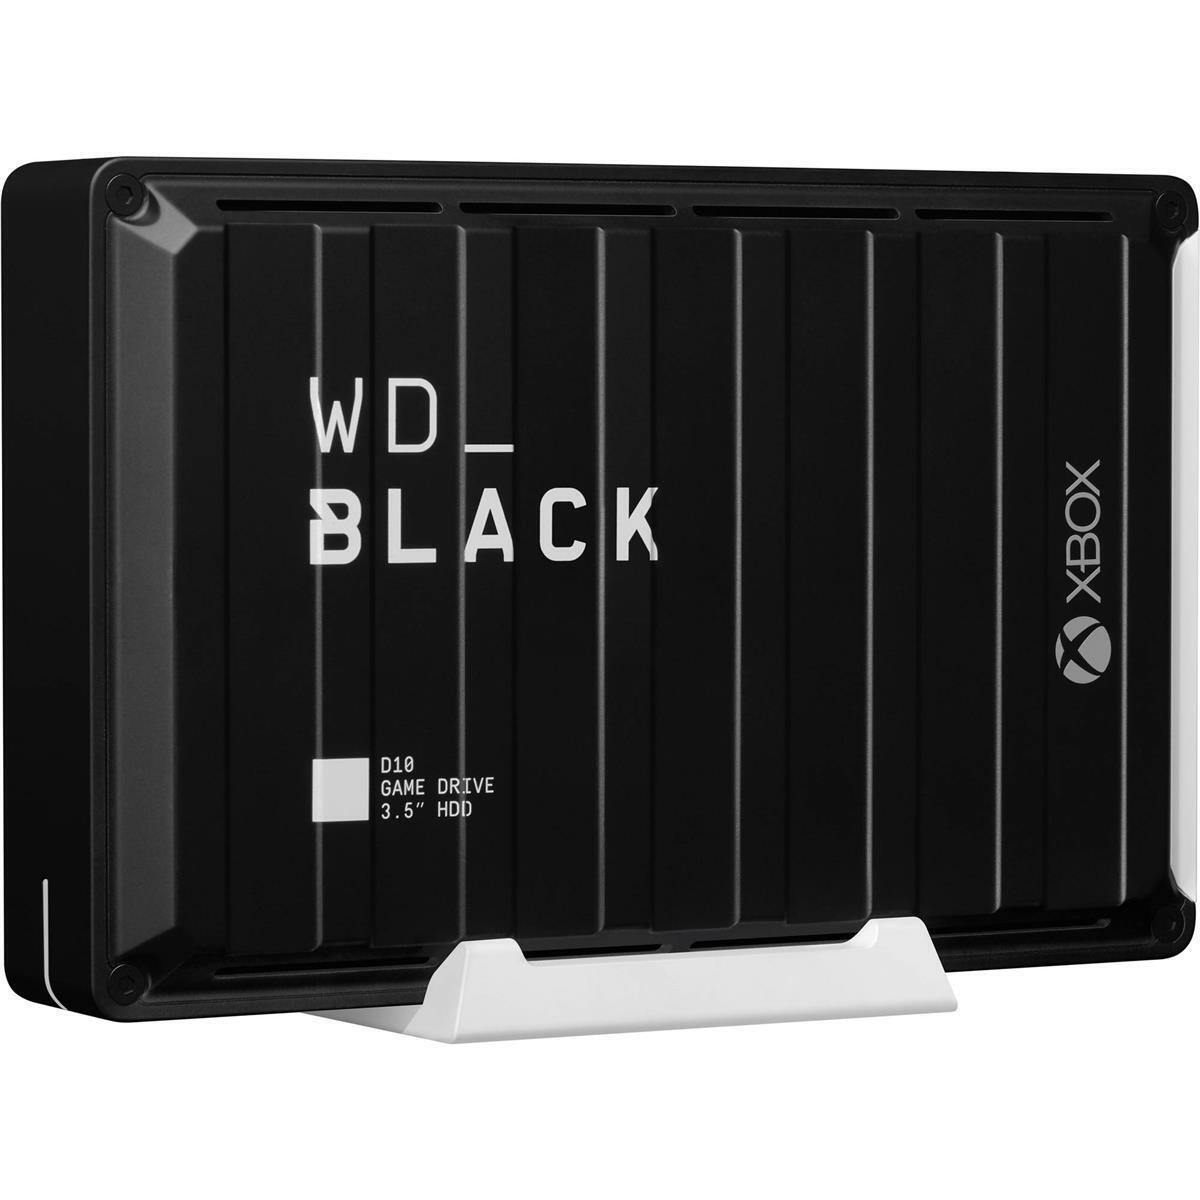 WD _BLACK D10 12TB Game Drive for Xbox #WDBA5E0120HBK-NESN